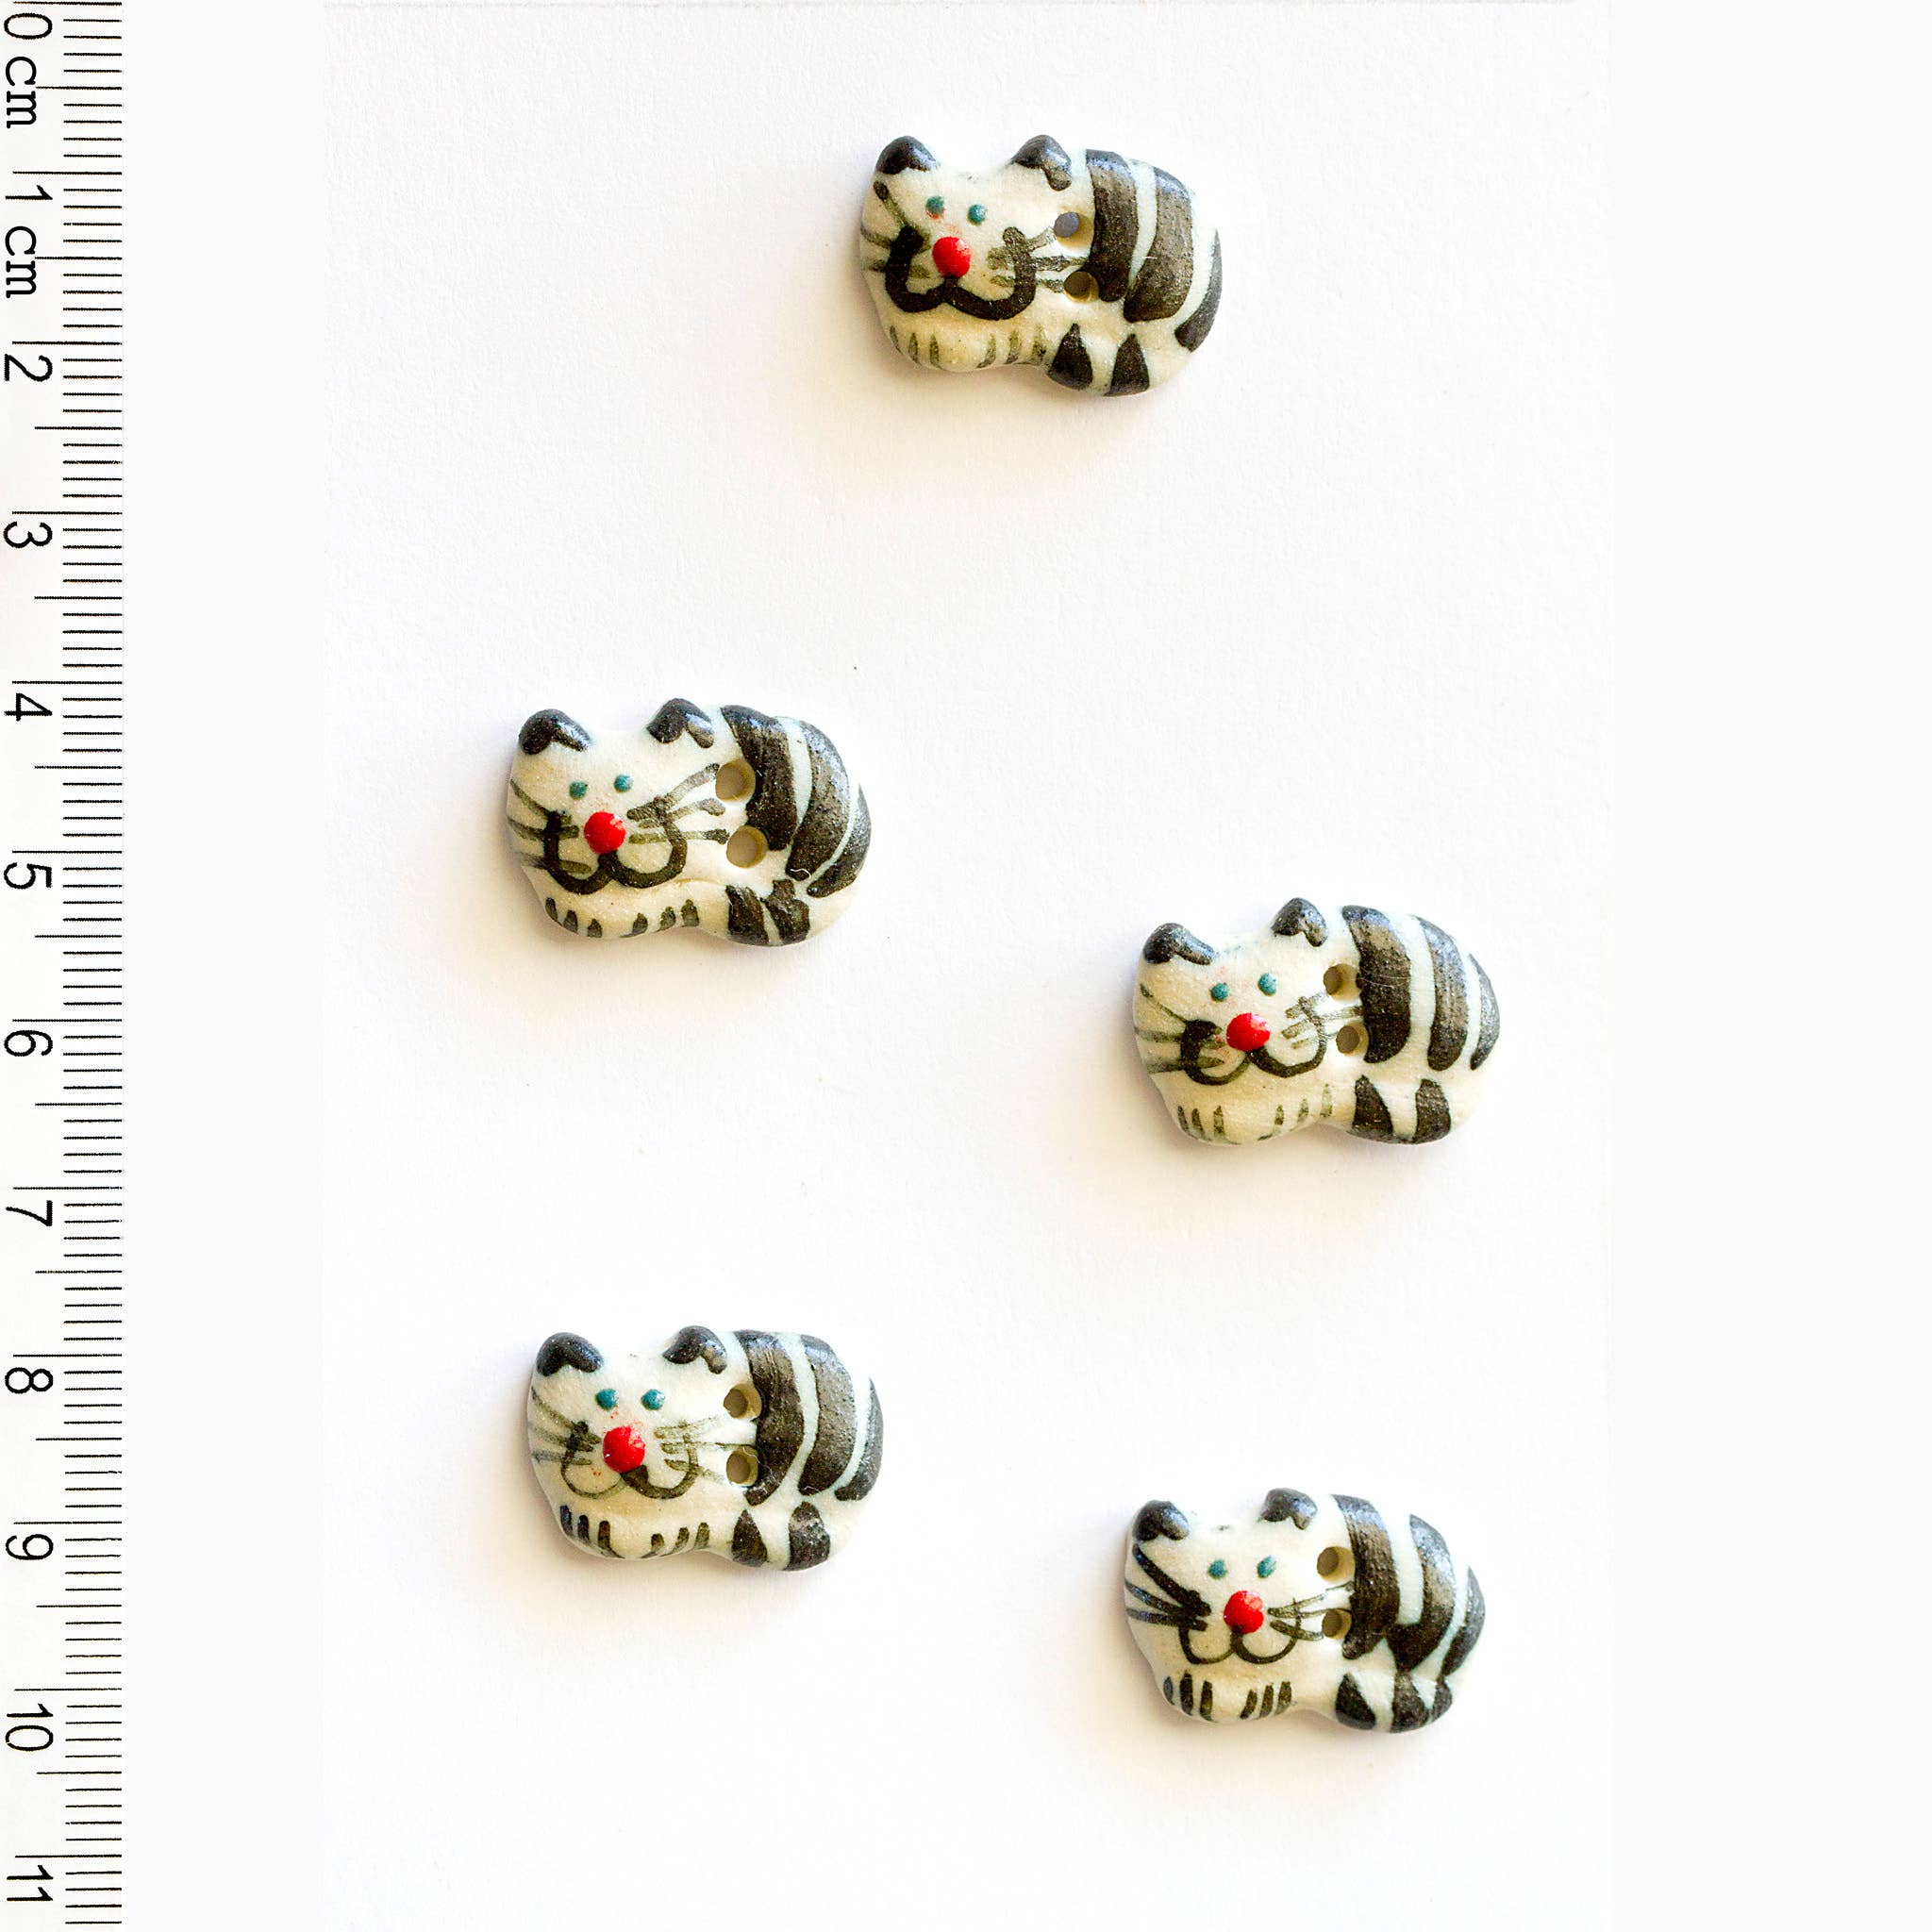 Incomparable Buttons - 5 Black and White Cat Buttons